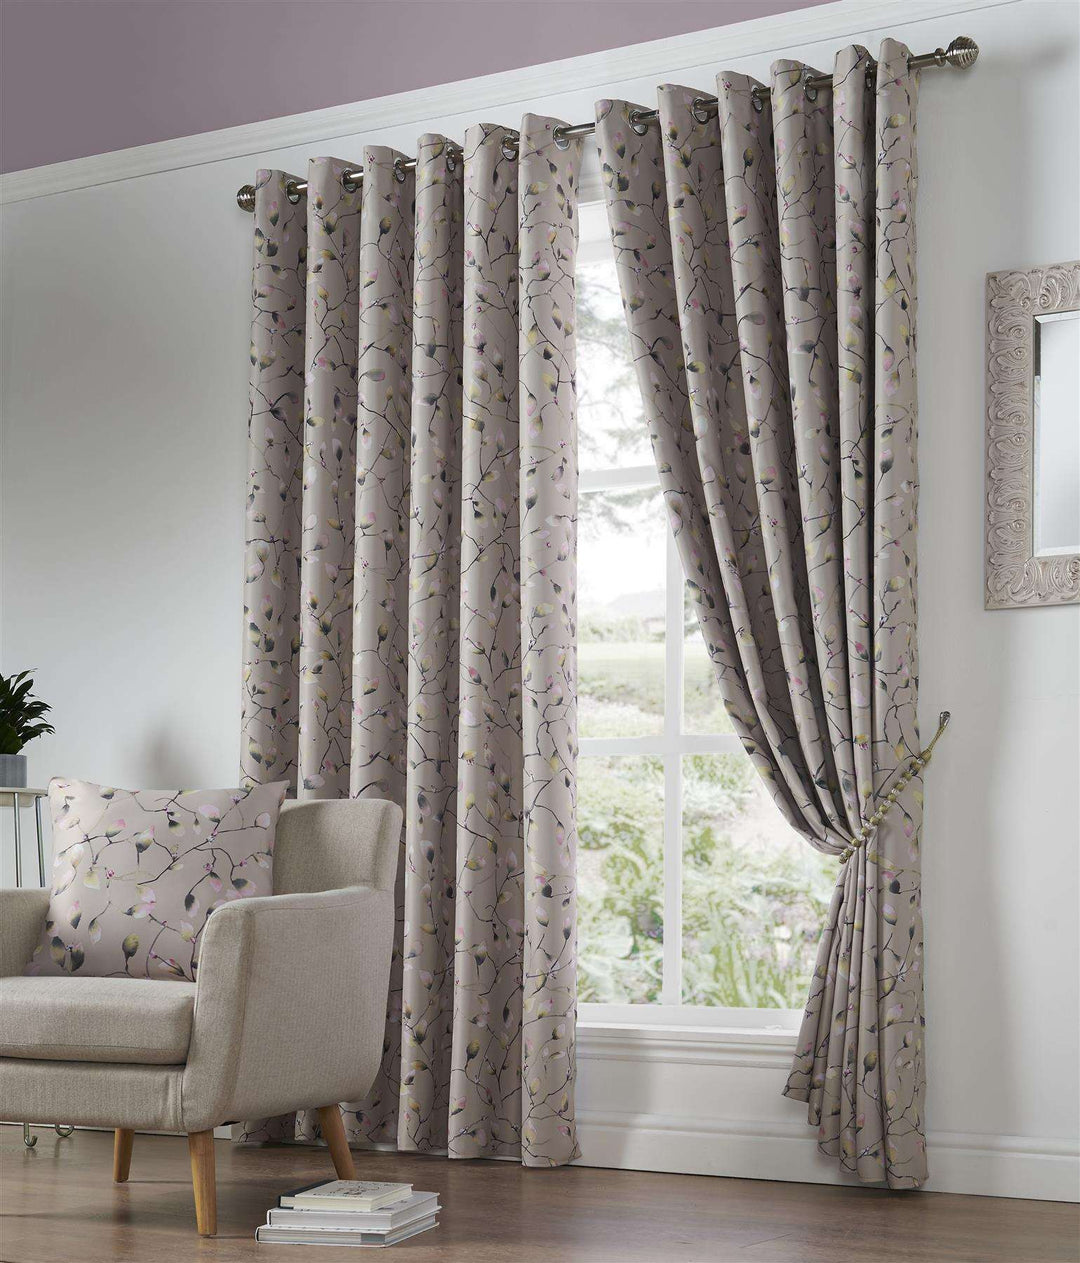 Blossom Bud (Ring Top Curtains) - TidySpaces